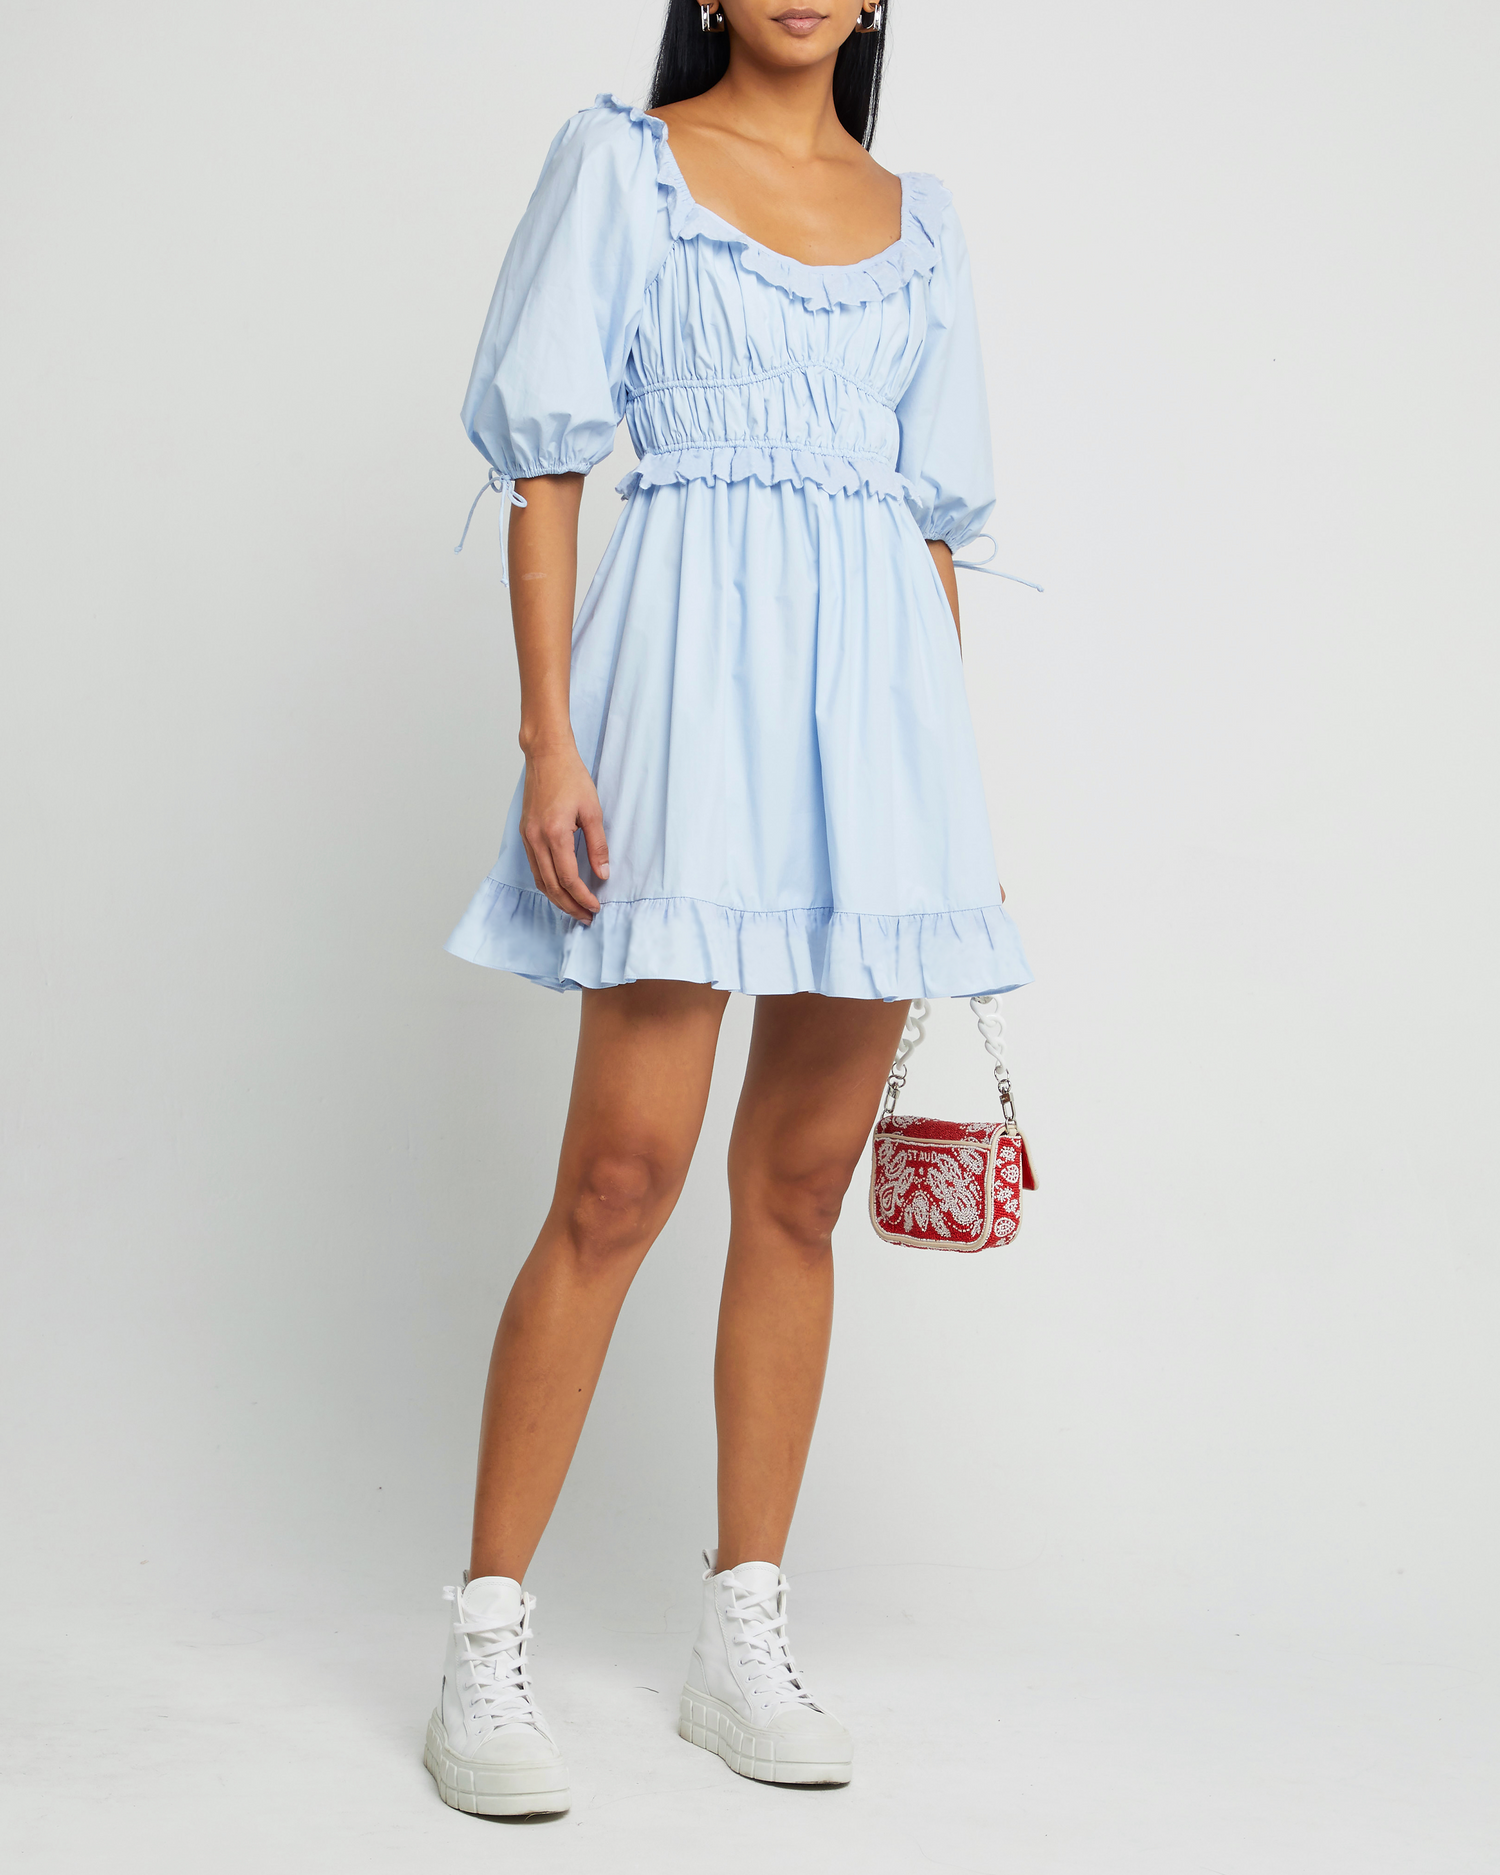 First image of Lucia Dress, a blue midi dress, lace details, ruffle, puff sleeves, scoop neck